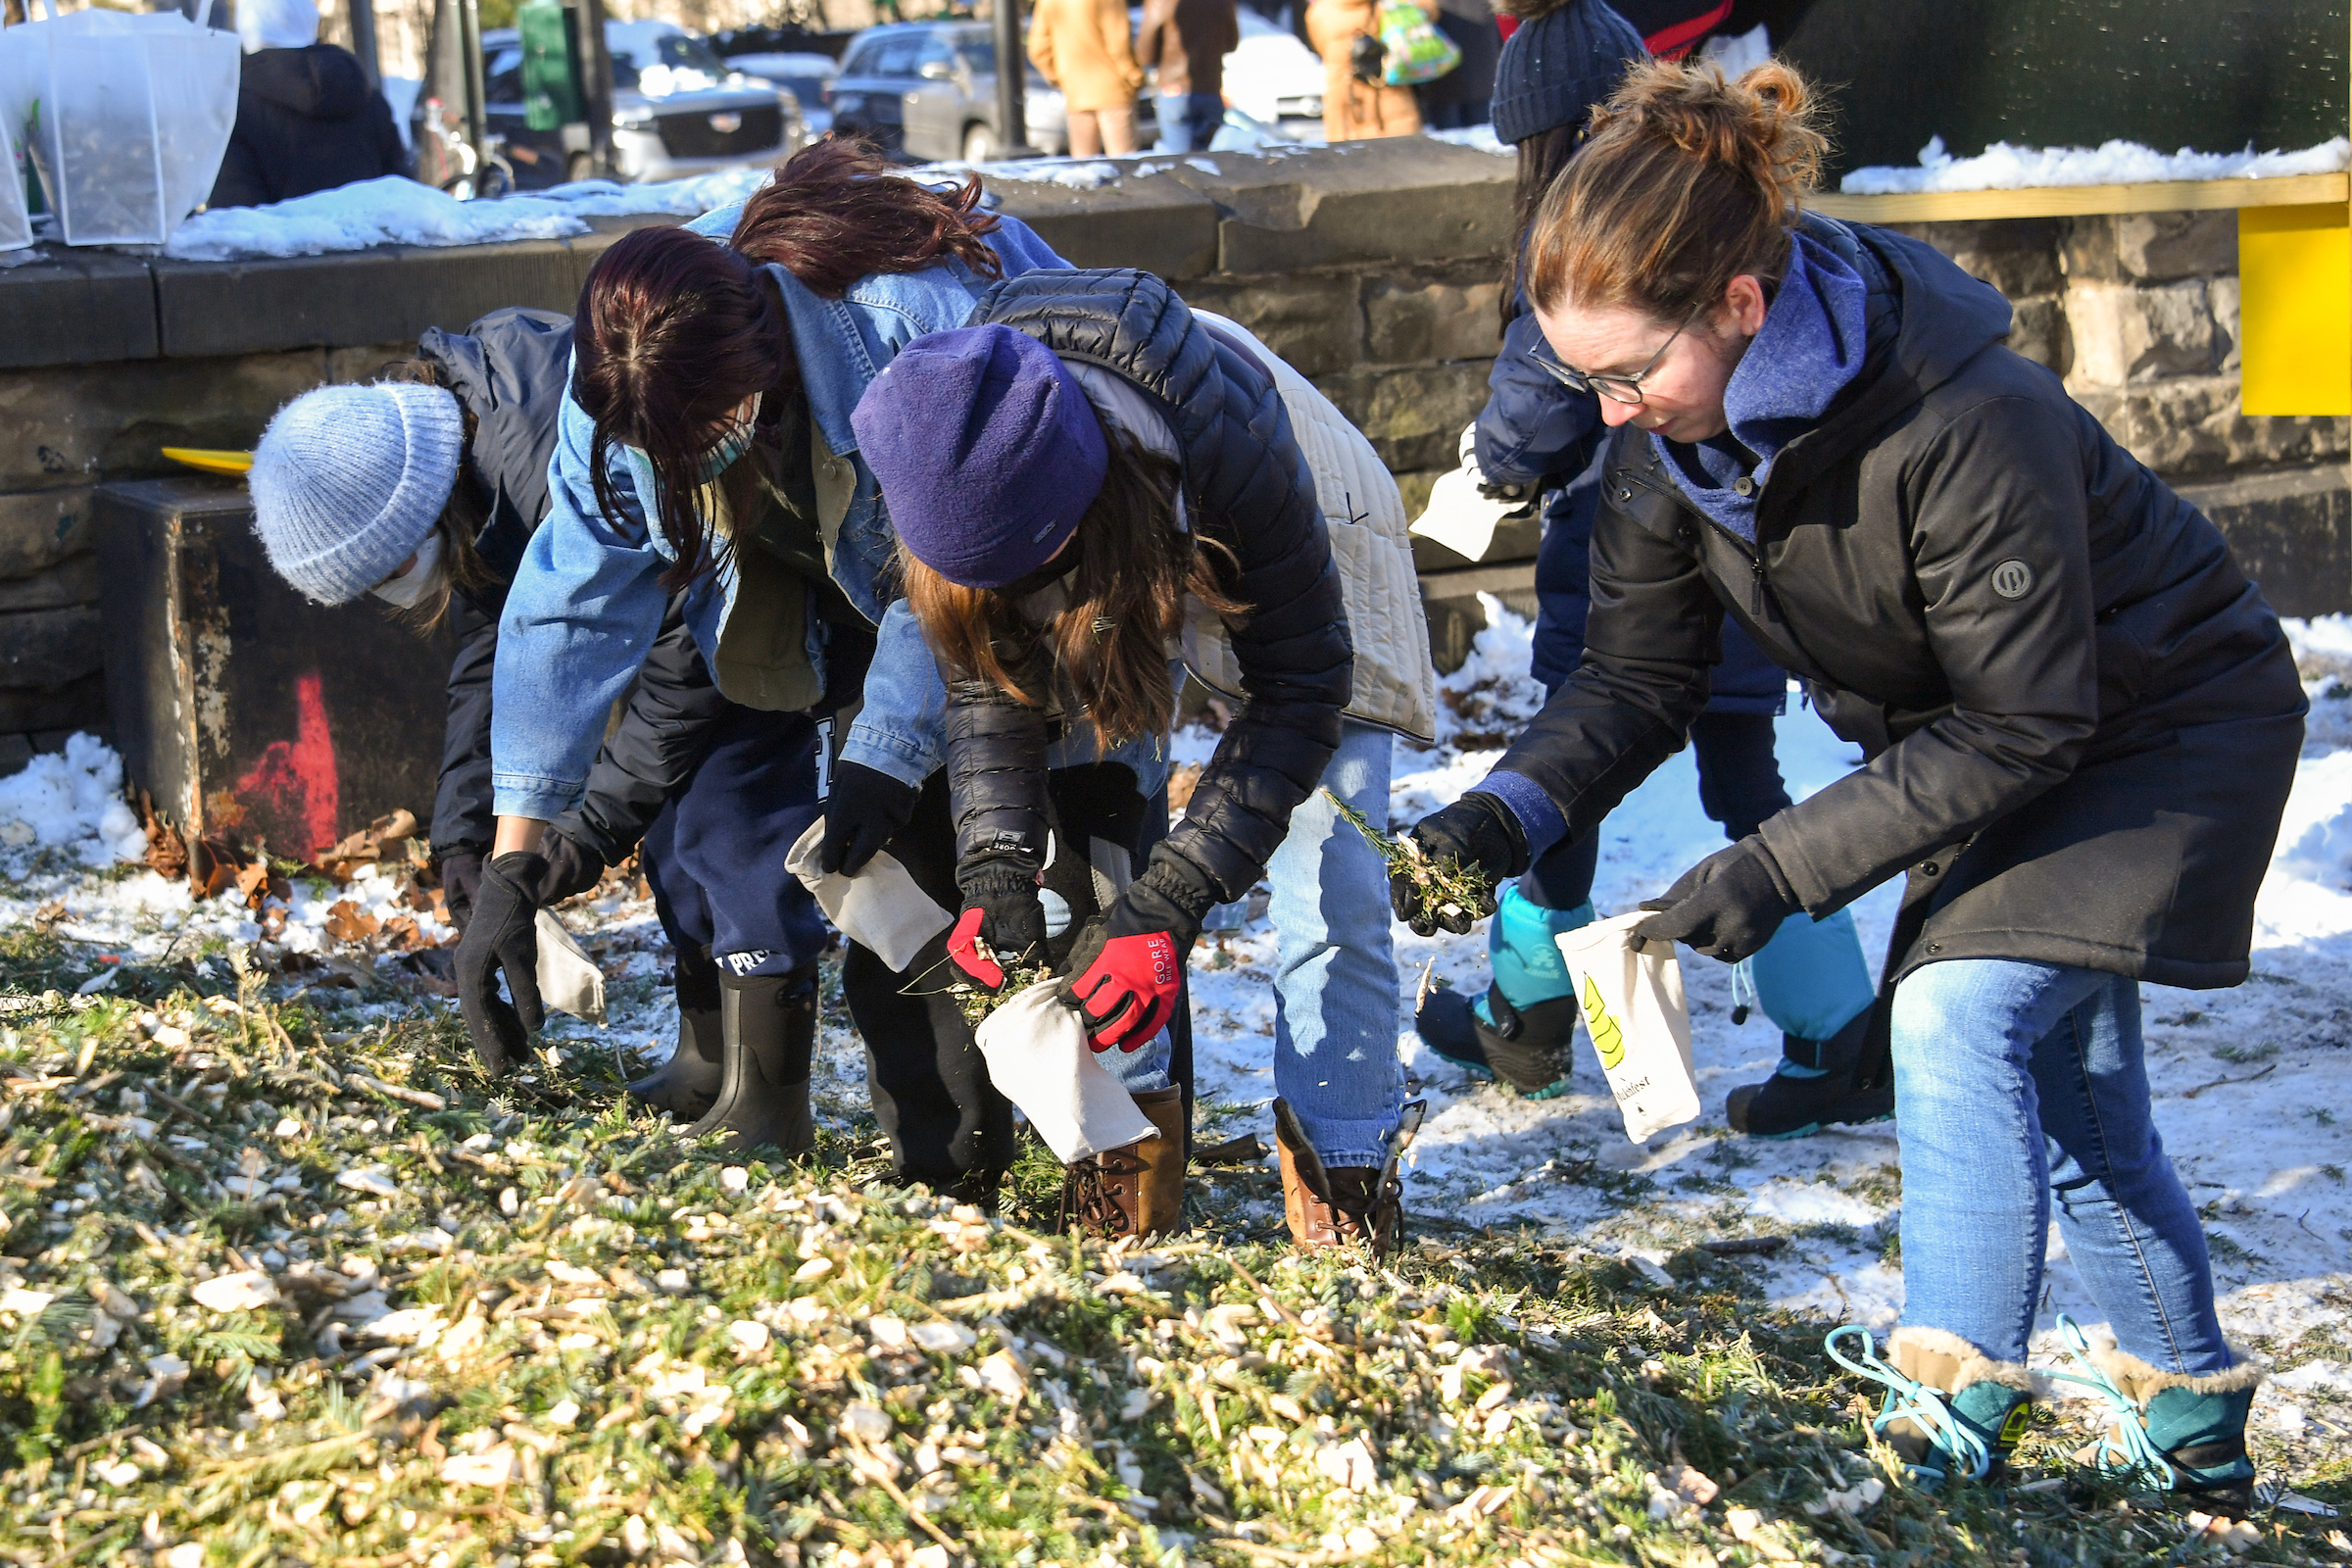 MULCHFEST, NYC PARKS’ ANNUAL HOLIDAY RECYCLING CELEBRATION DECEMBER 26 